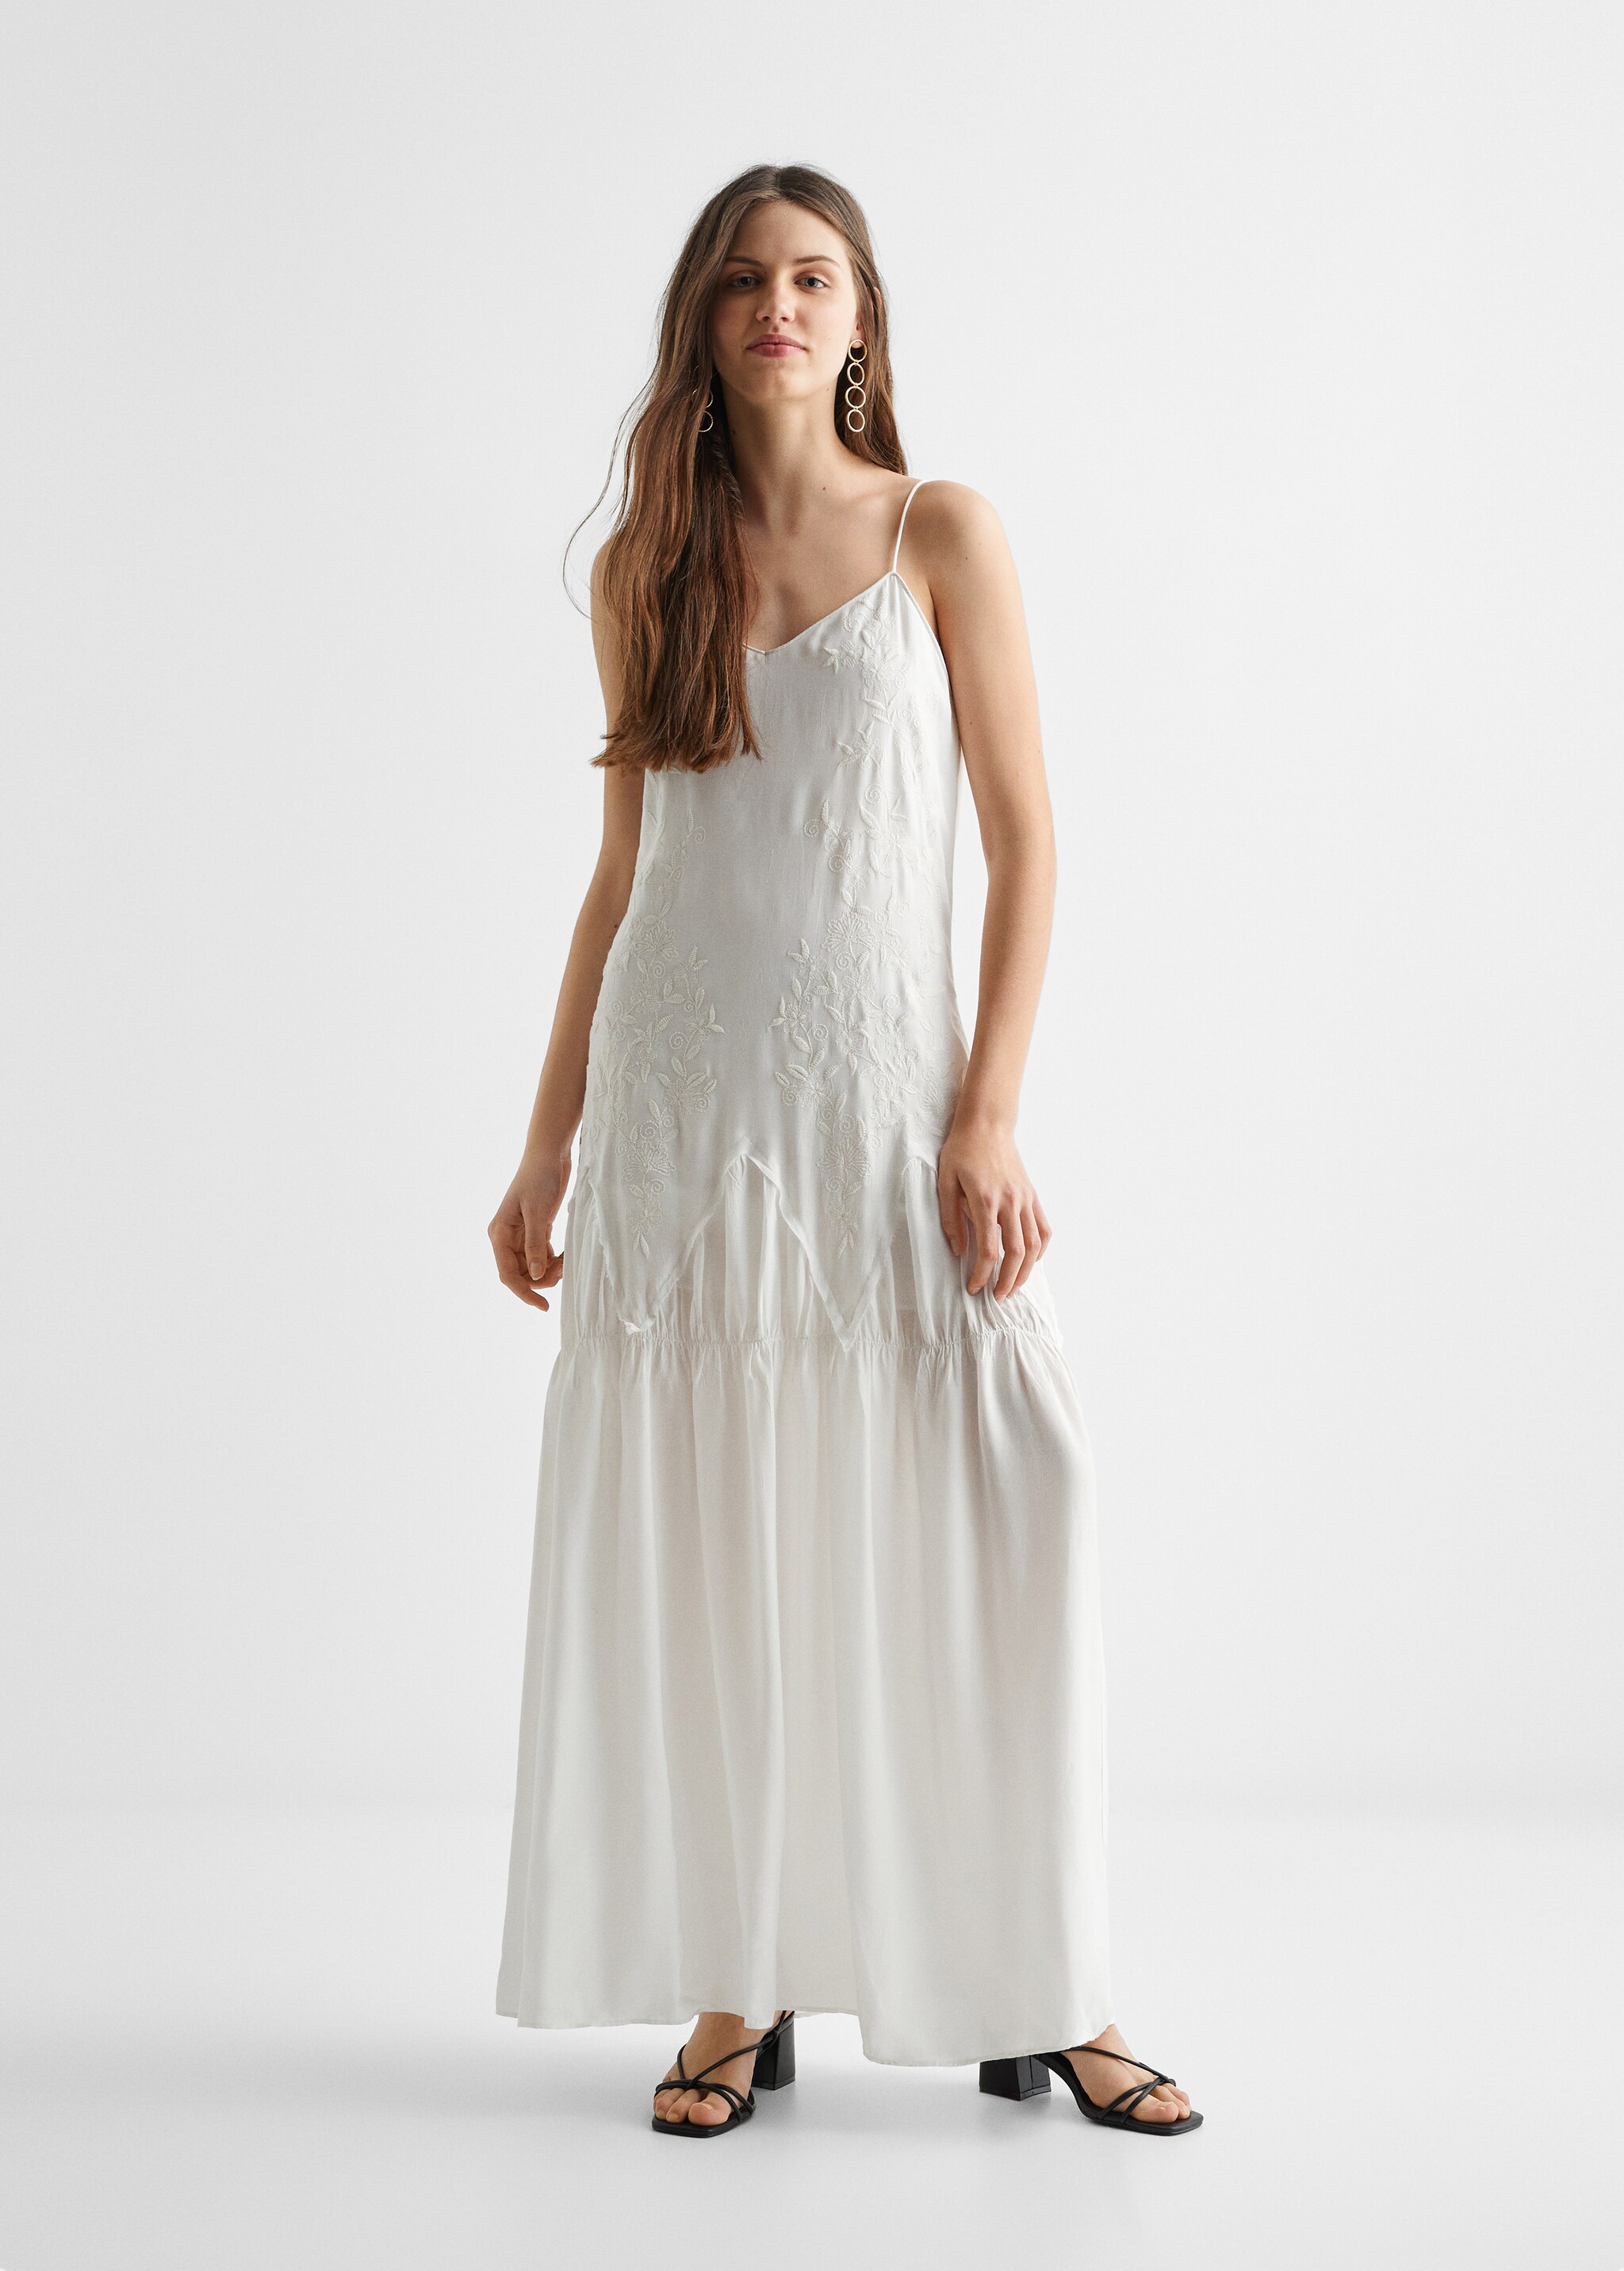 Embroidered long dress - General plane